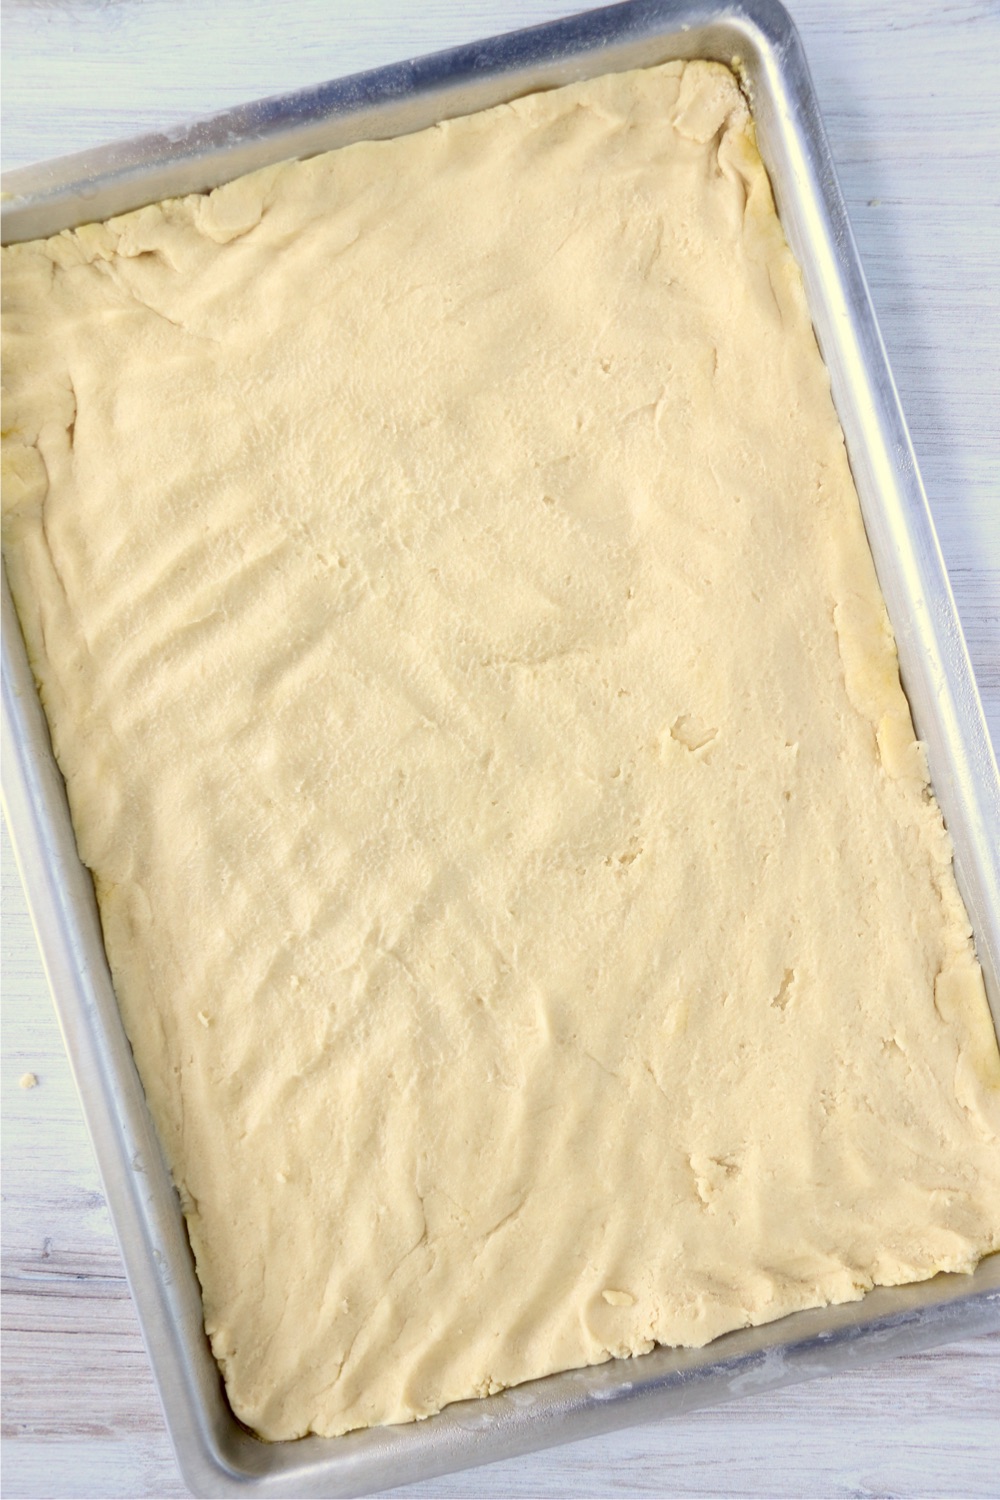 Spreading dough in jelly roll pan